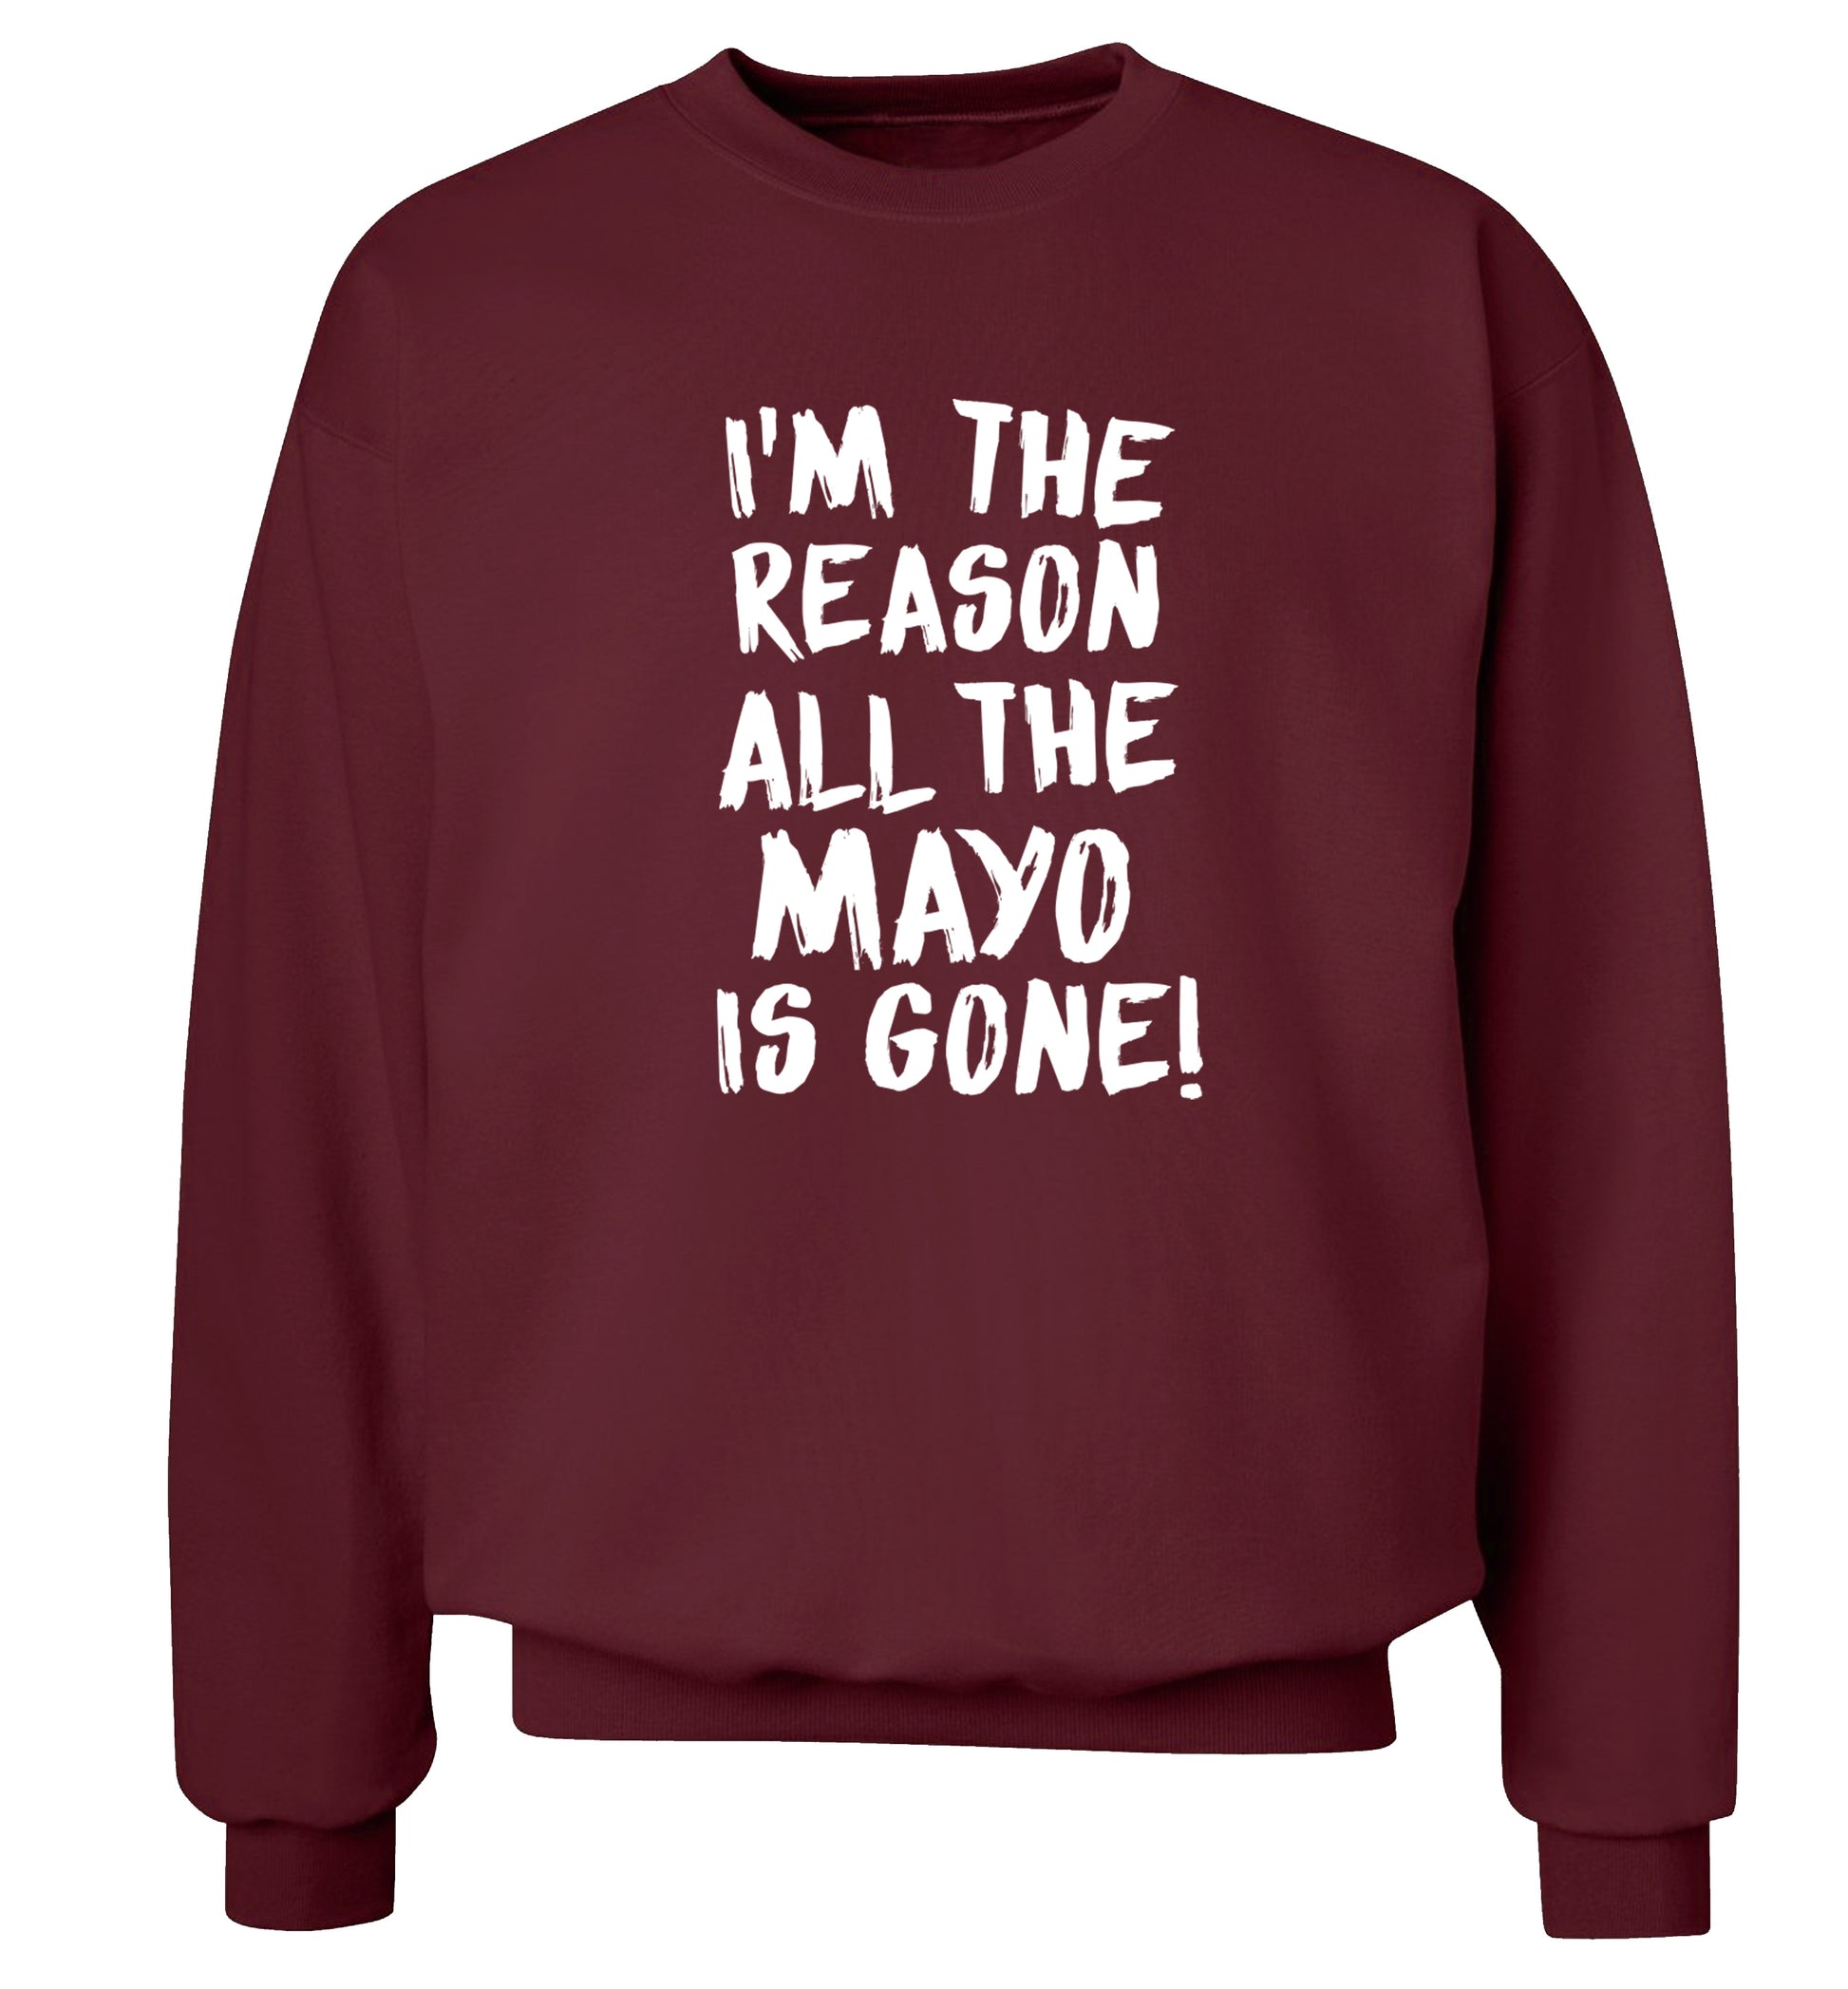 I'm the reason why all the mayo is gone Adult's unisex maroon Sweater 2XL